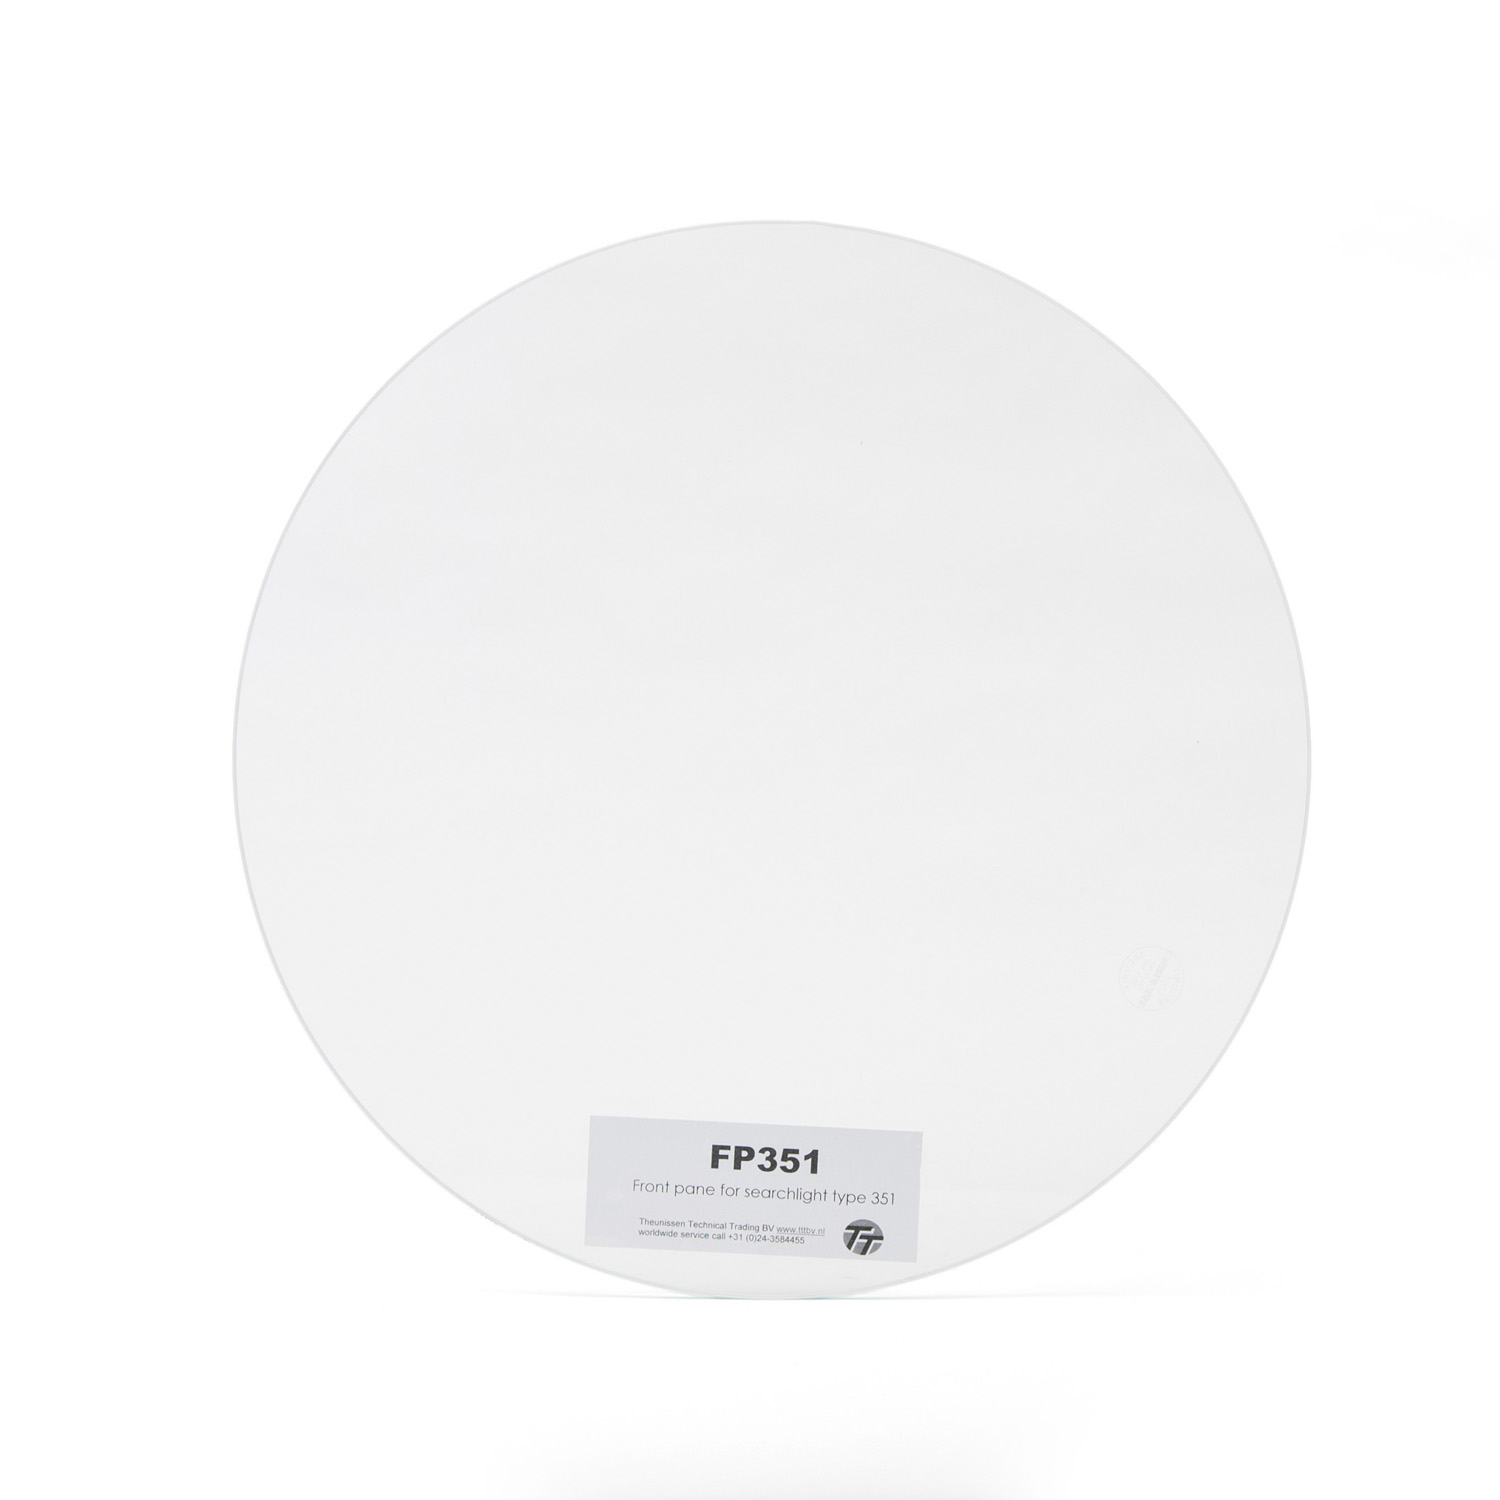 FP351 Front pane for searchlight, type 351